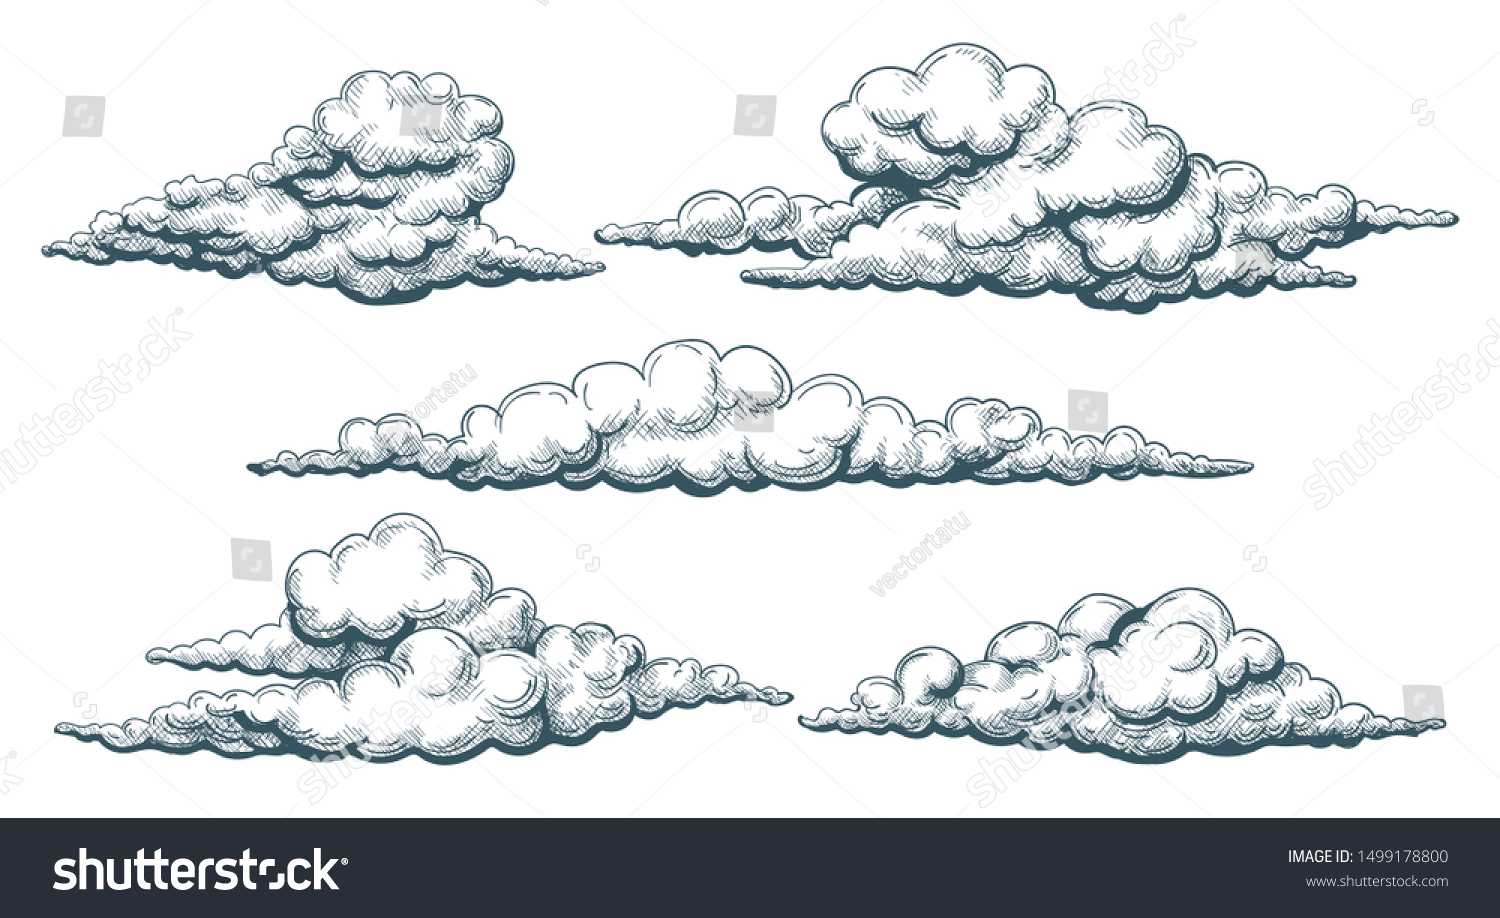 New Clouds Drawing Sketch 